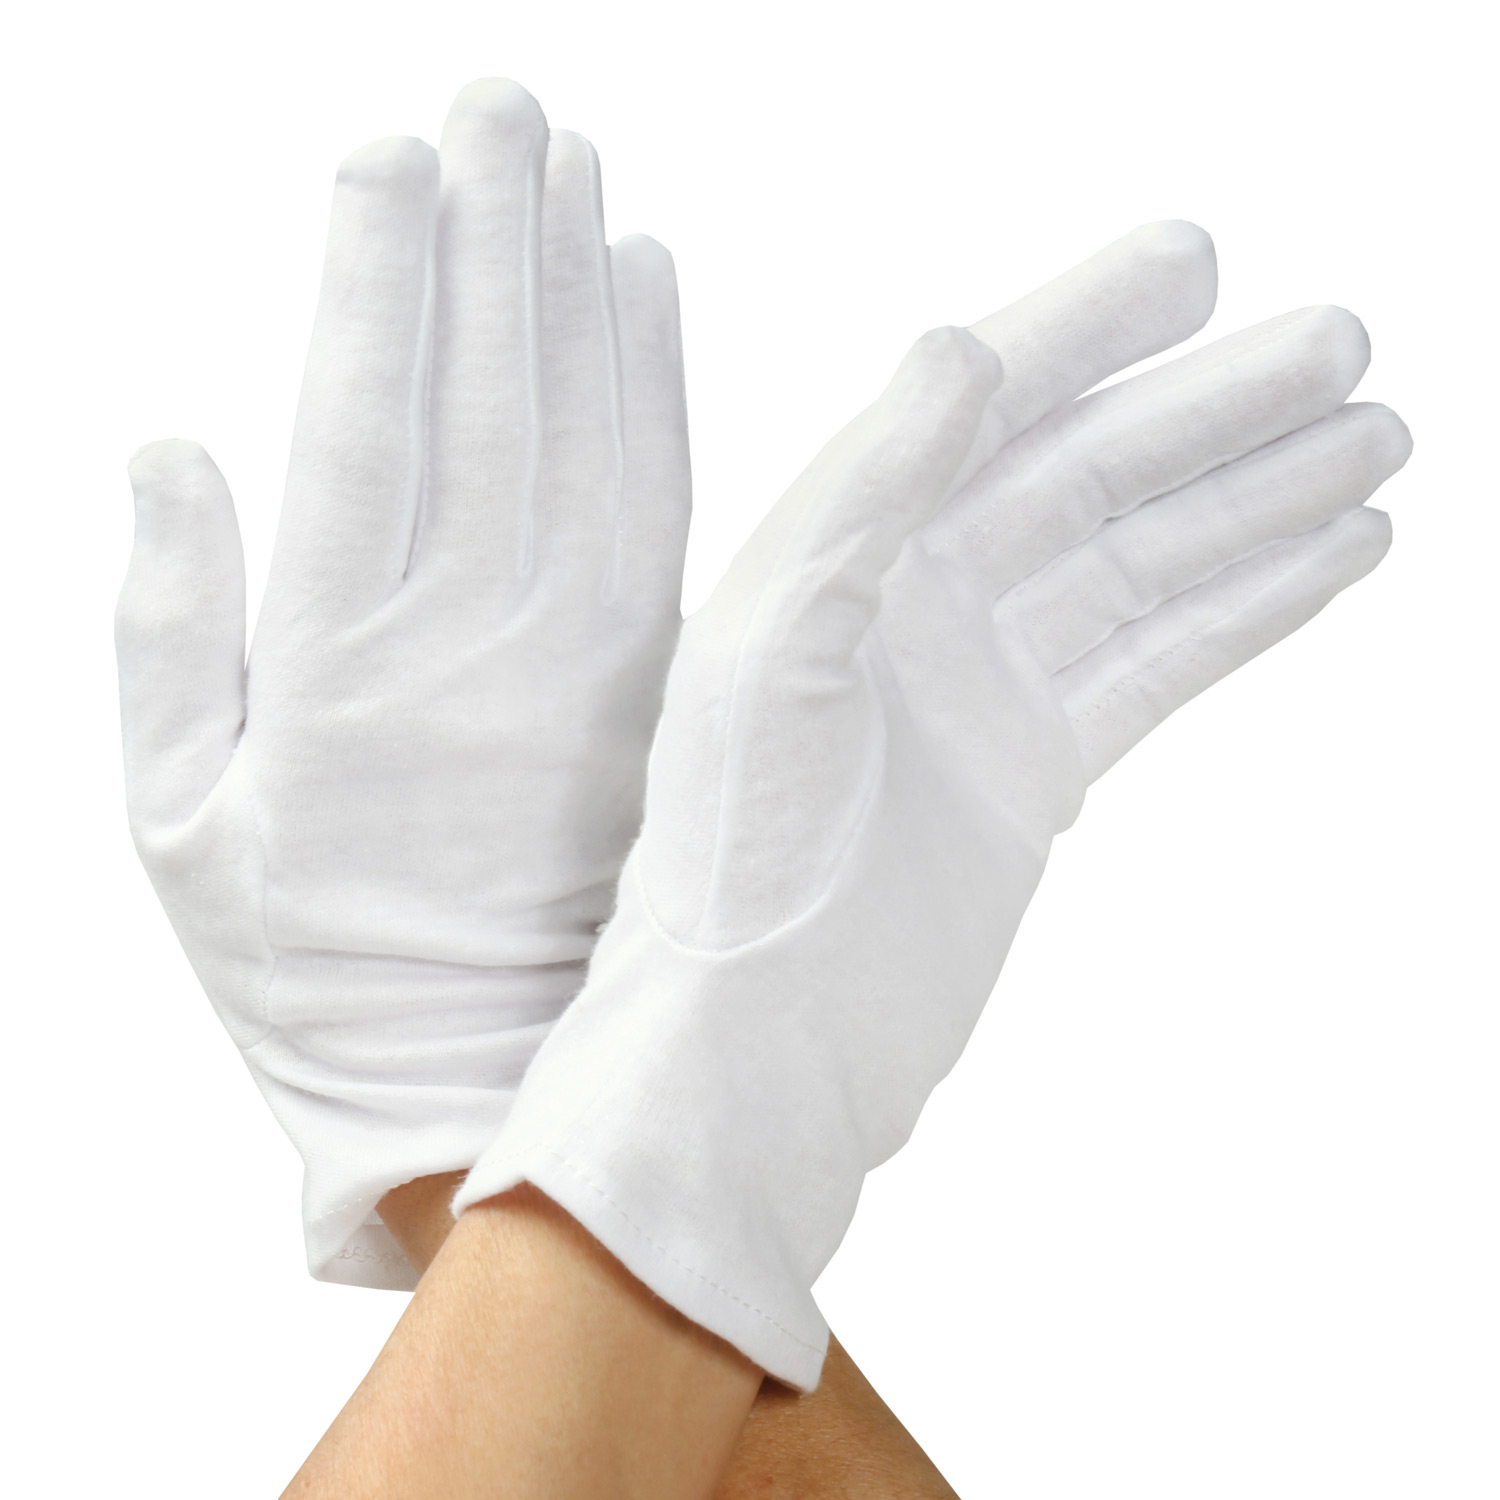 Skin Care White Cotton Gloves - Use After Application of Creams Lotions ...